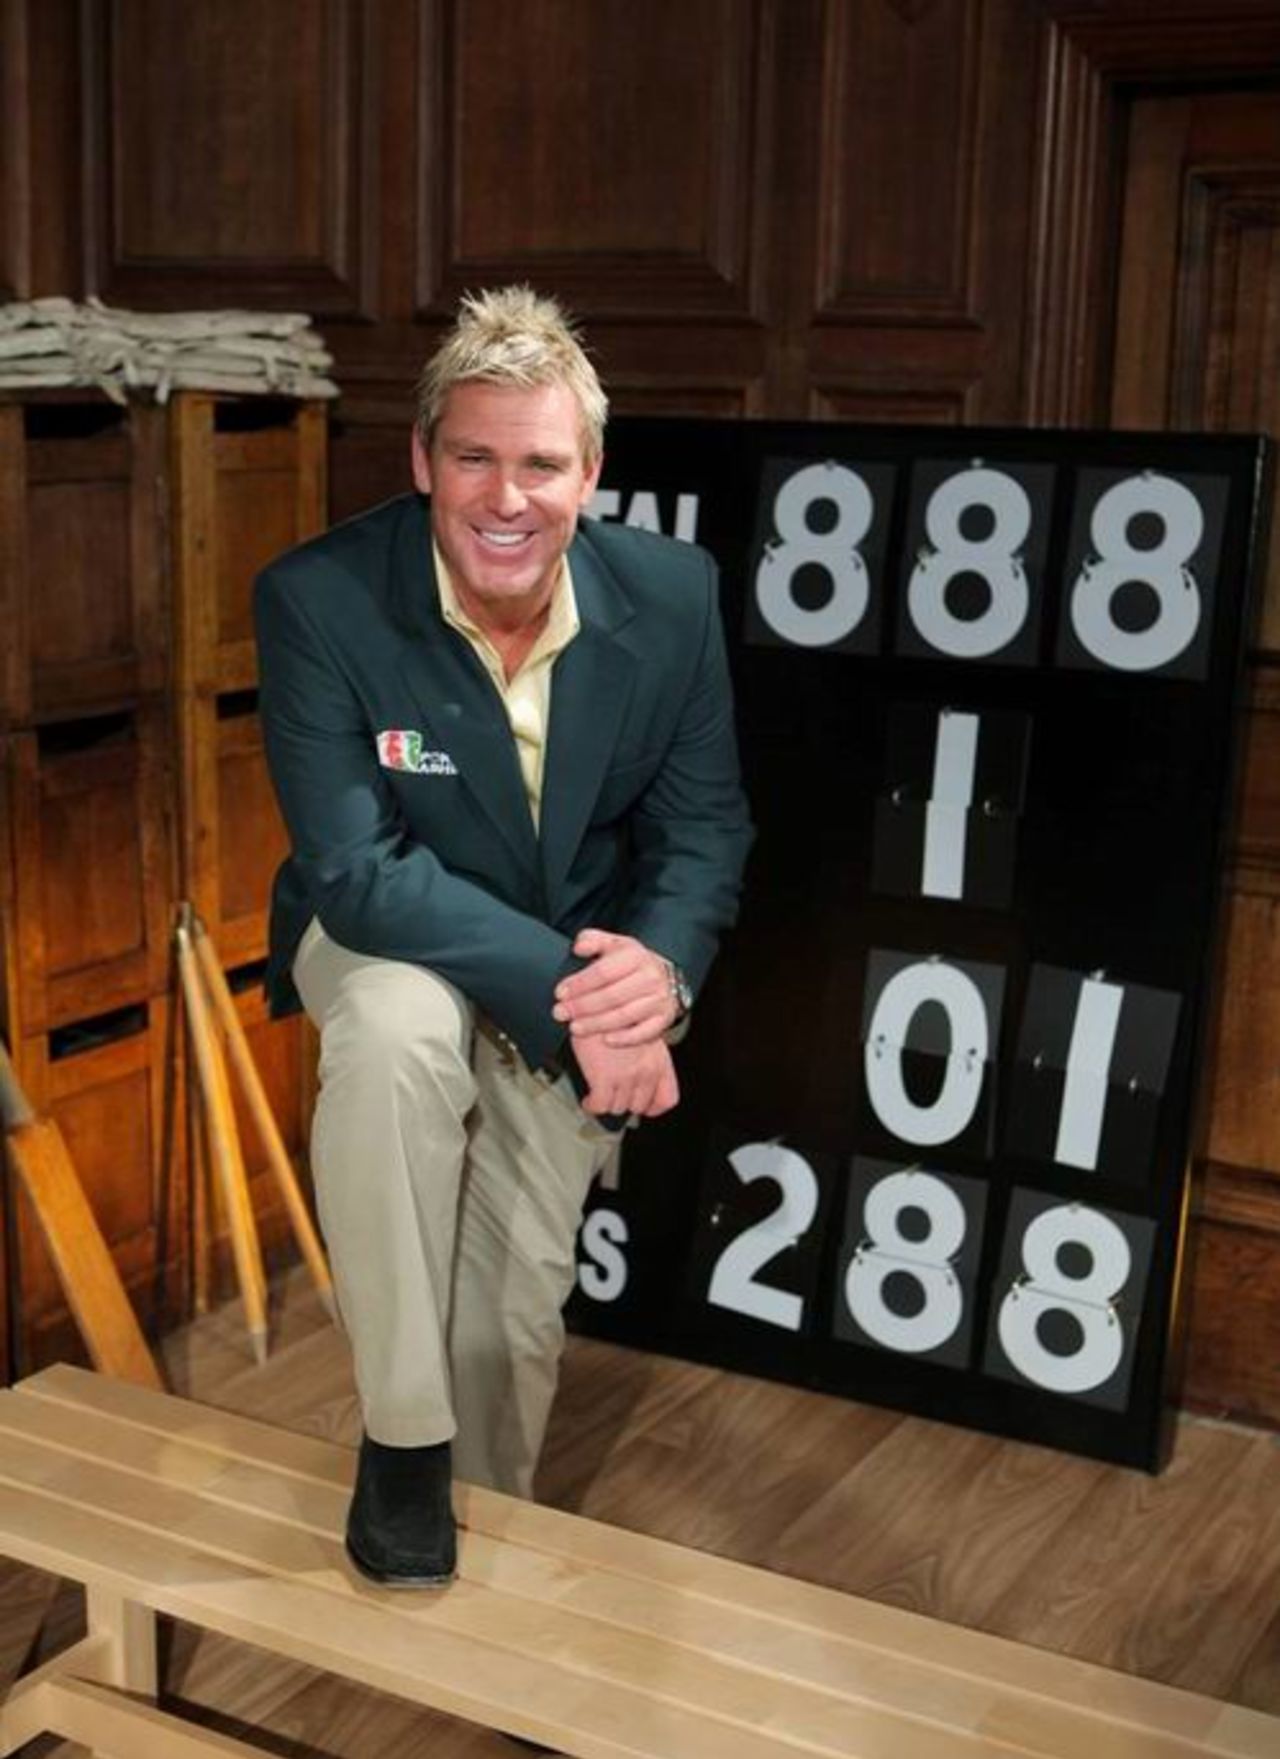 Shane Warne at the Poker Ashes, June 2009